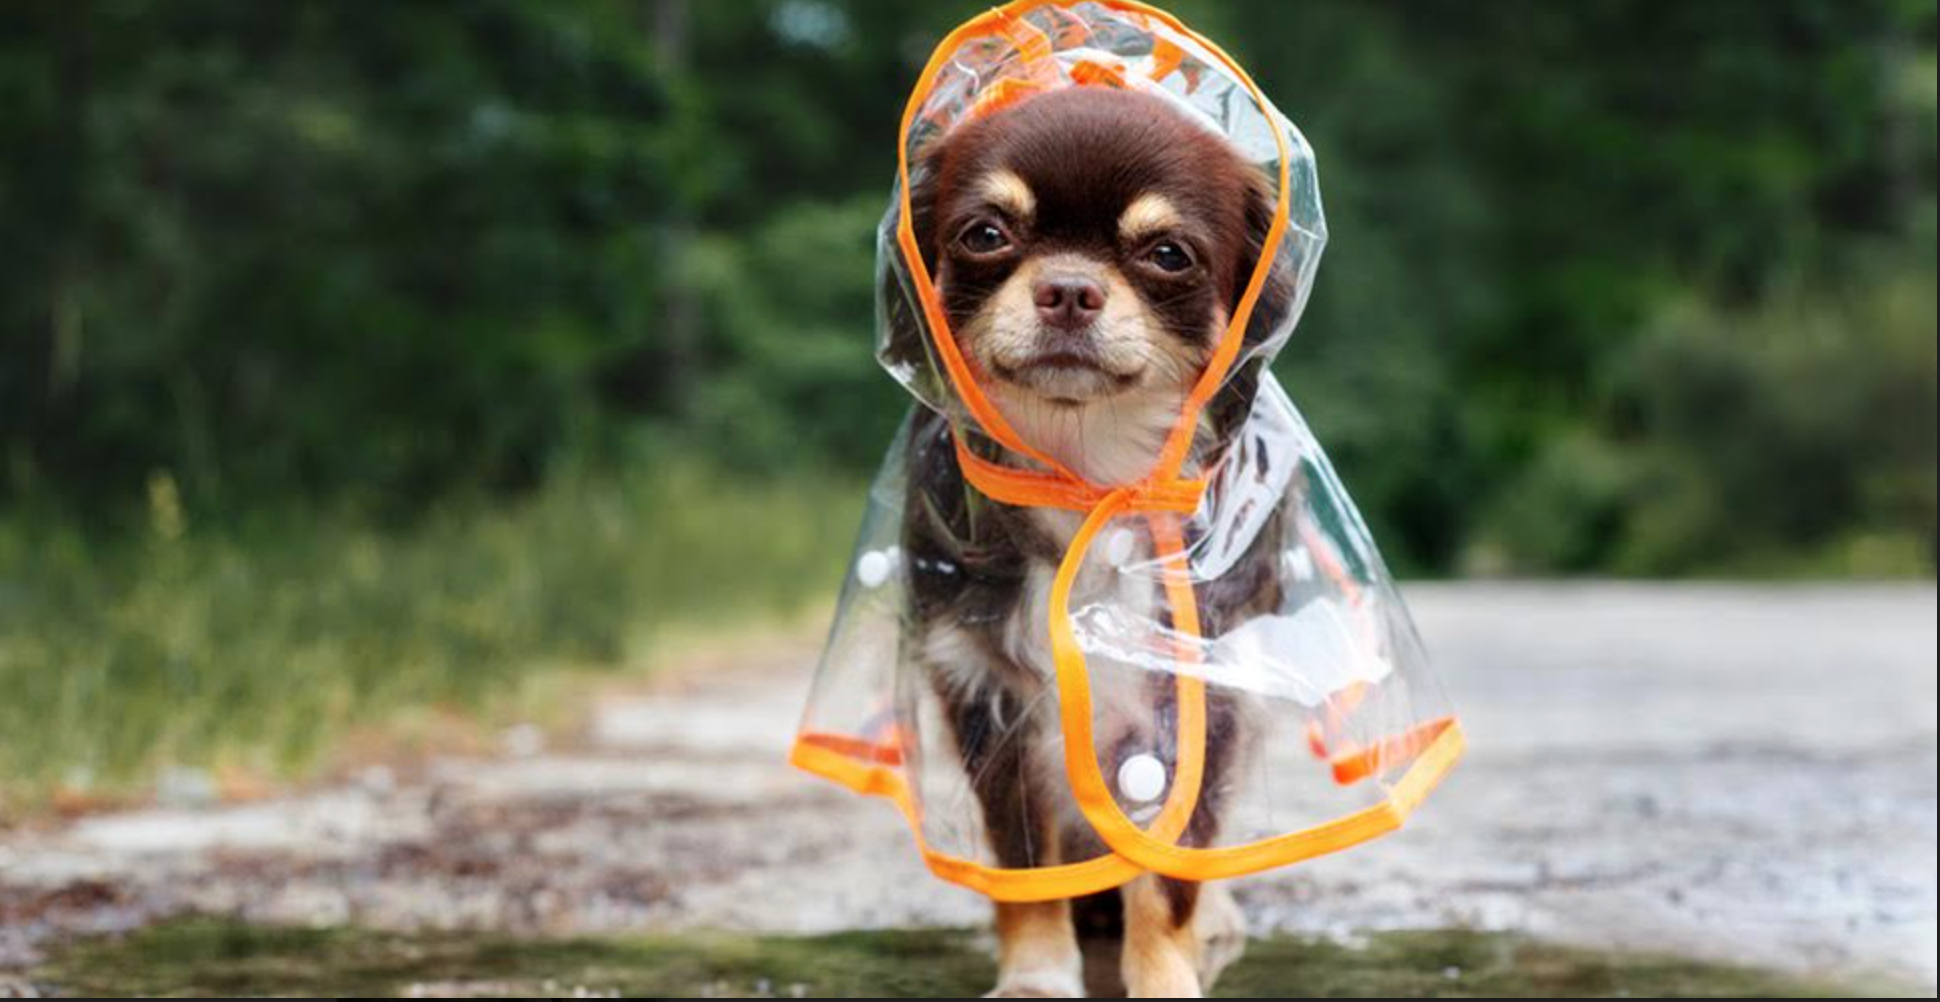 brown Chihuahua wearing a clear and orange lined rain coat walking on a rainy day. very cute. he looks happy despite the rain